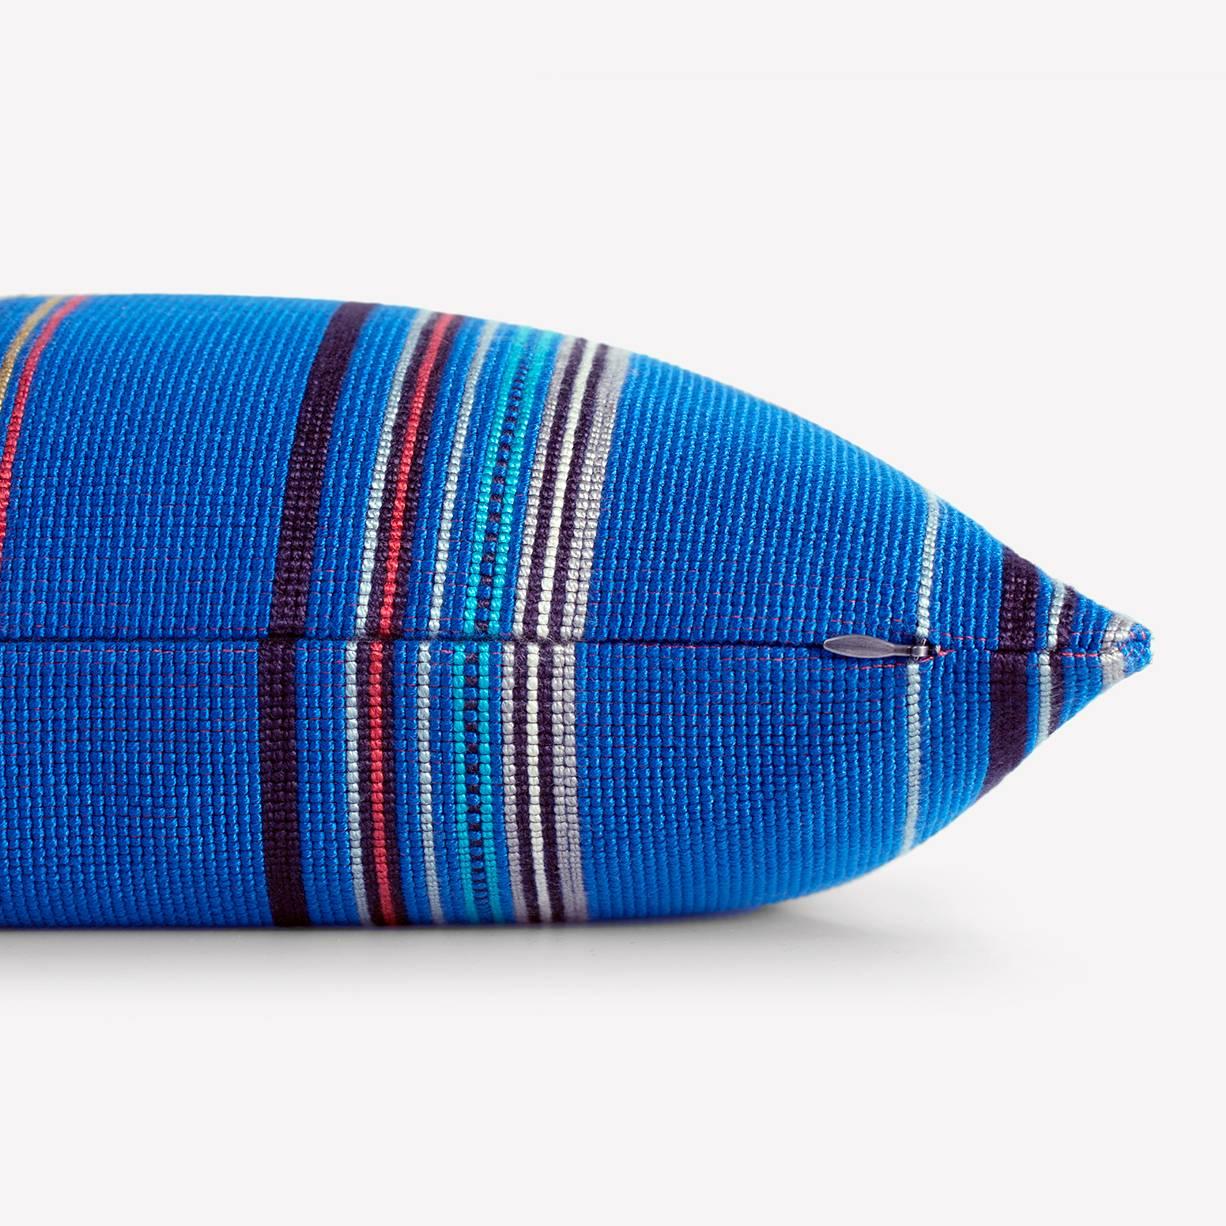 Maharam pillow
Point by Paul Smith 
017 Cobalt

A study in variegation, Point by Paul Smith explores scale, density, rhythm, color, and proportion in an imaginative display of British fashion. Created in collaboration with the Maharam Design studio,